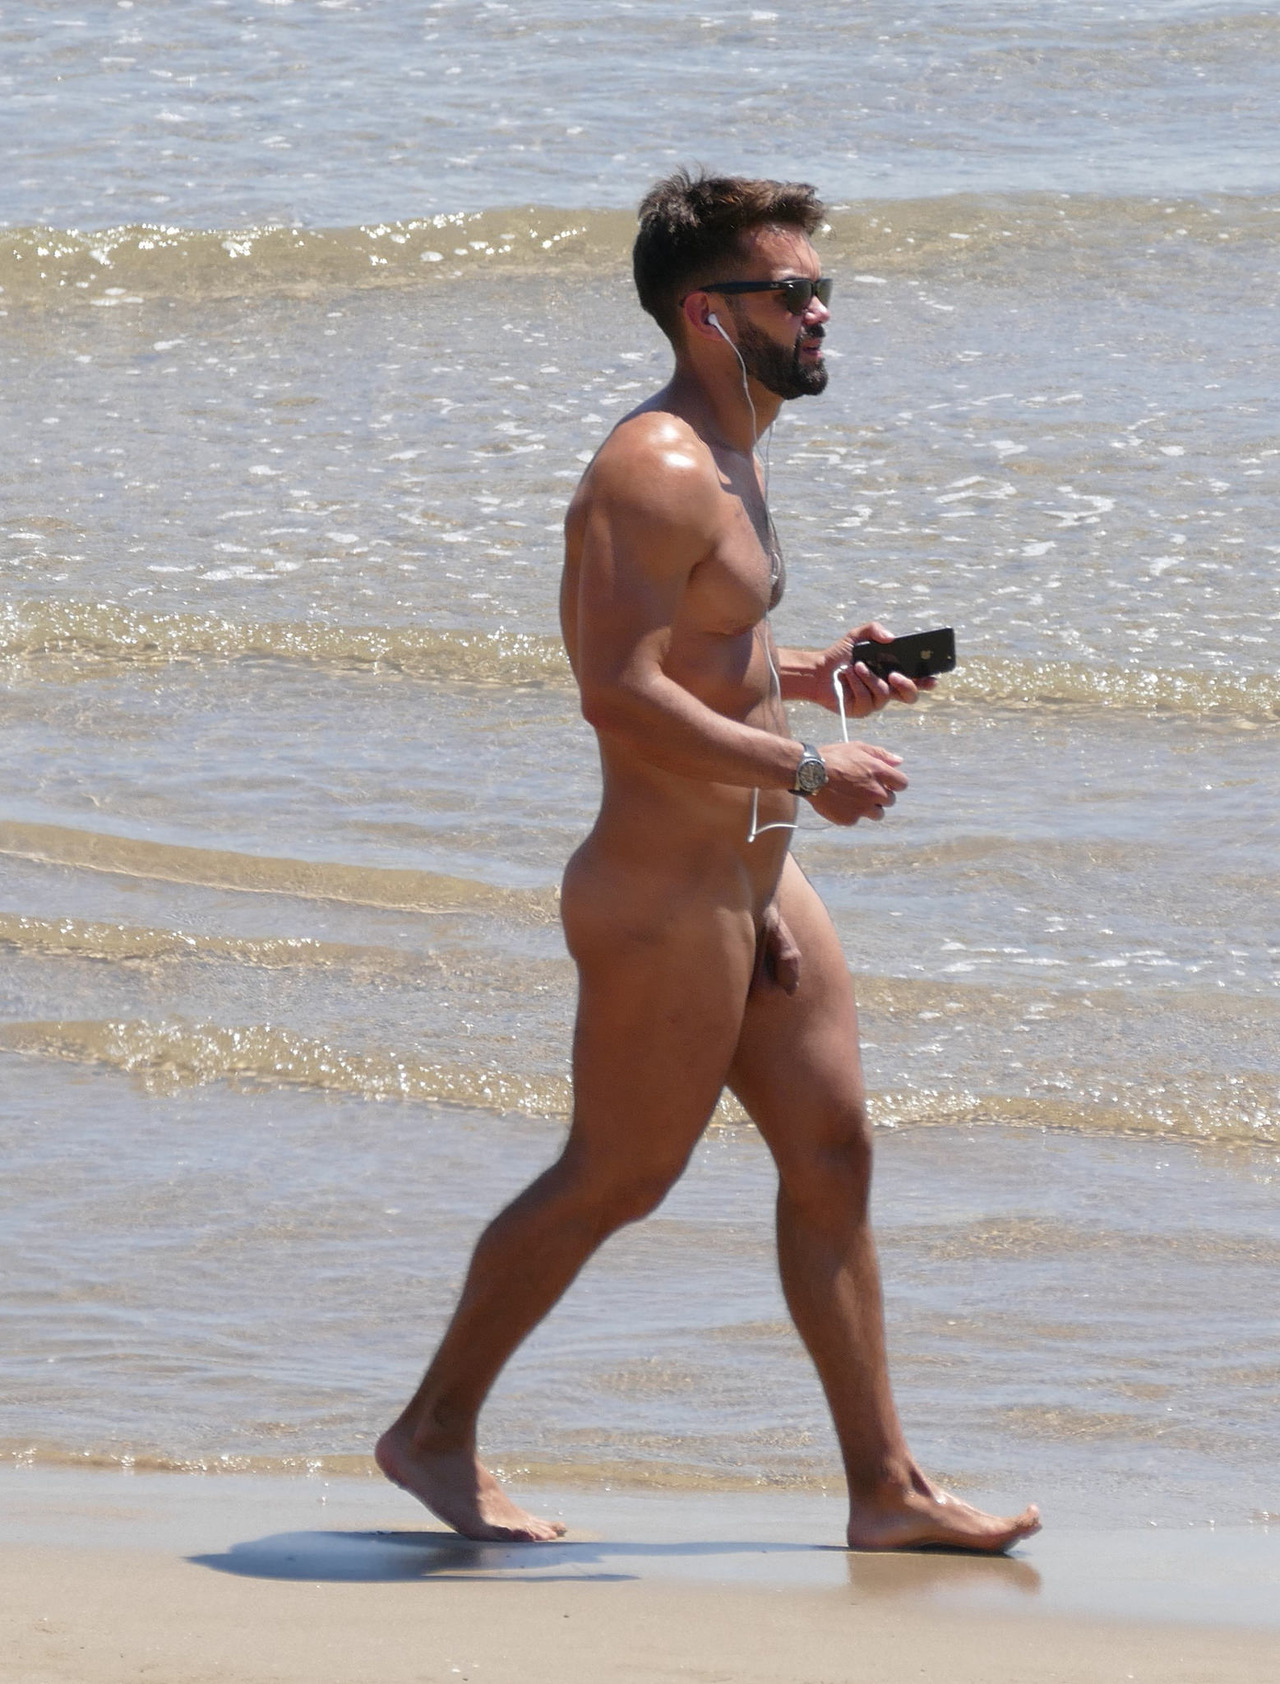 Nudist guys at beaches and in public.